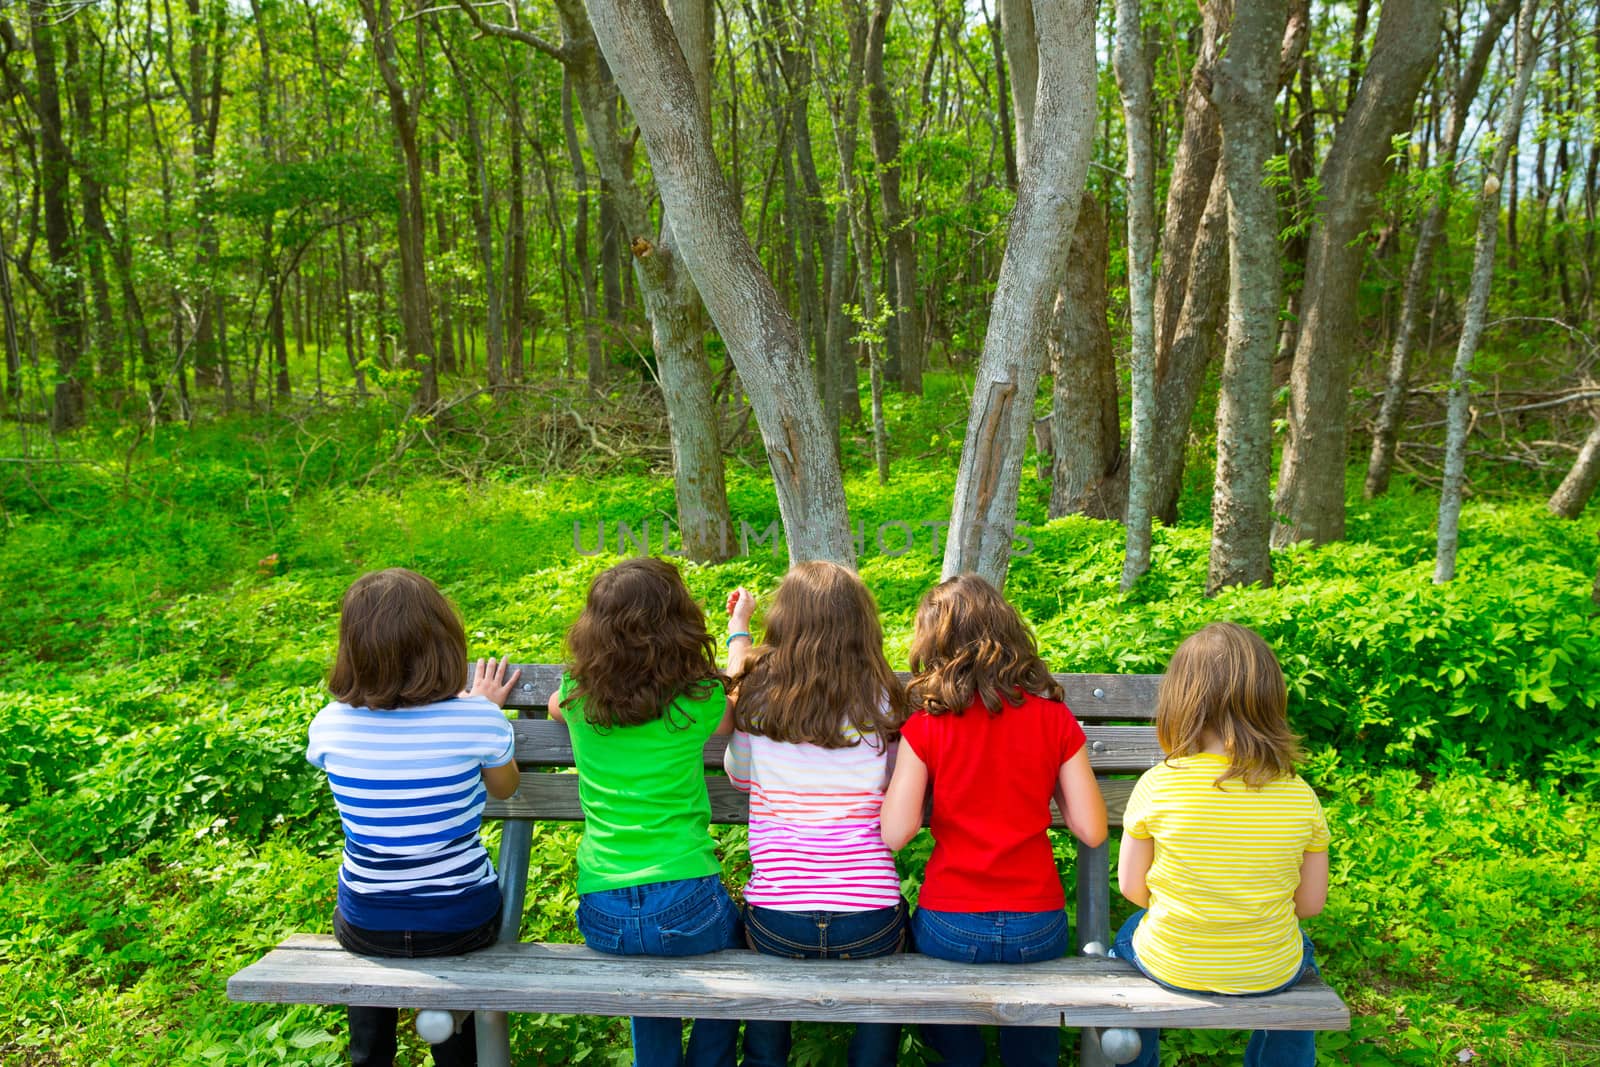 Children sister and friend girls sitting on park bench looking at forest rear view